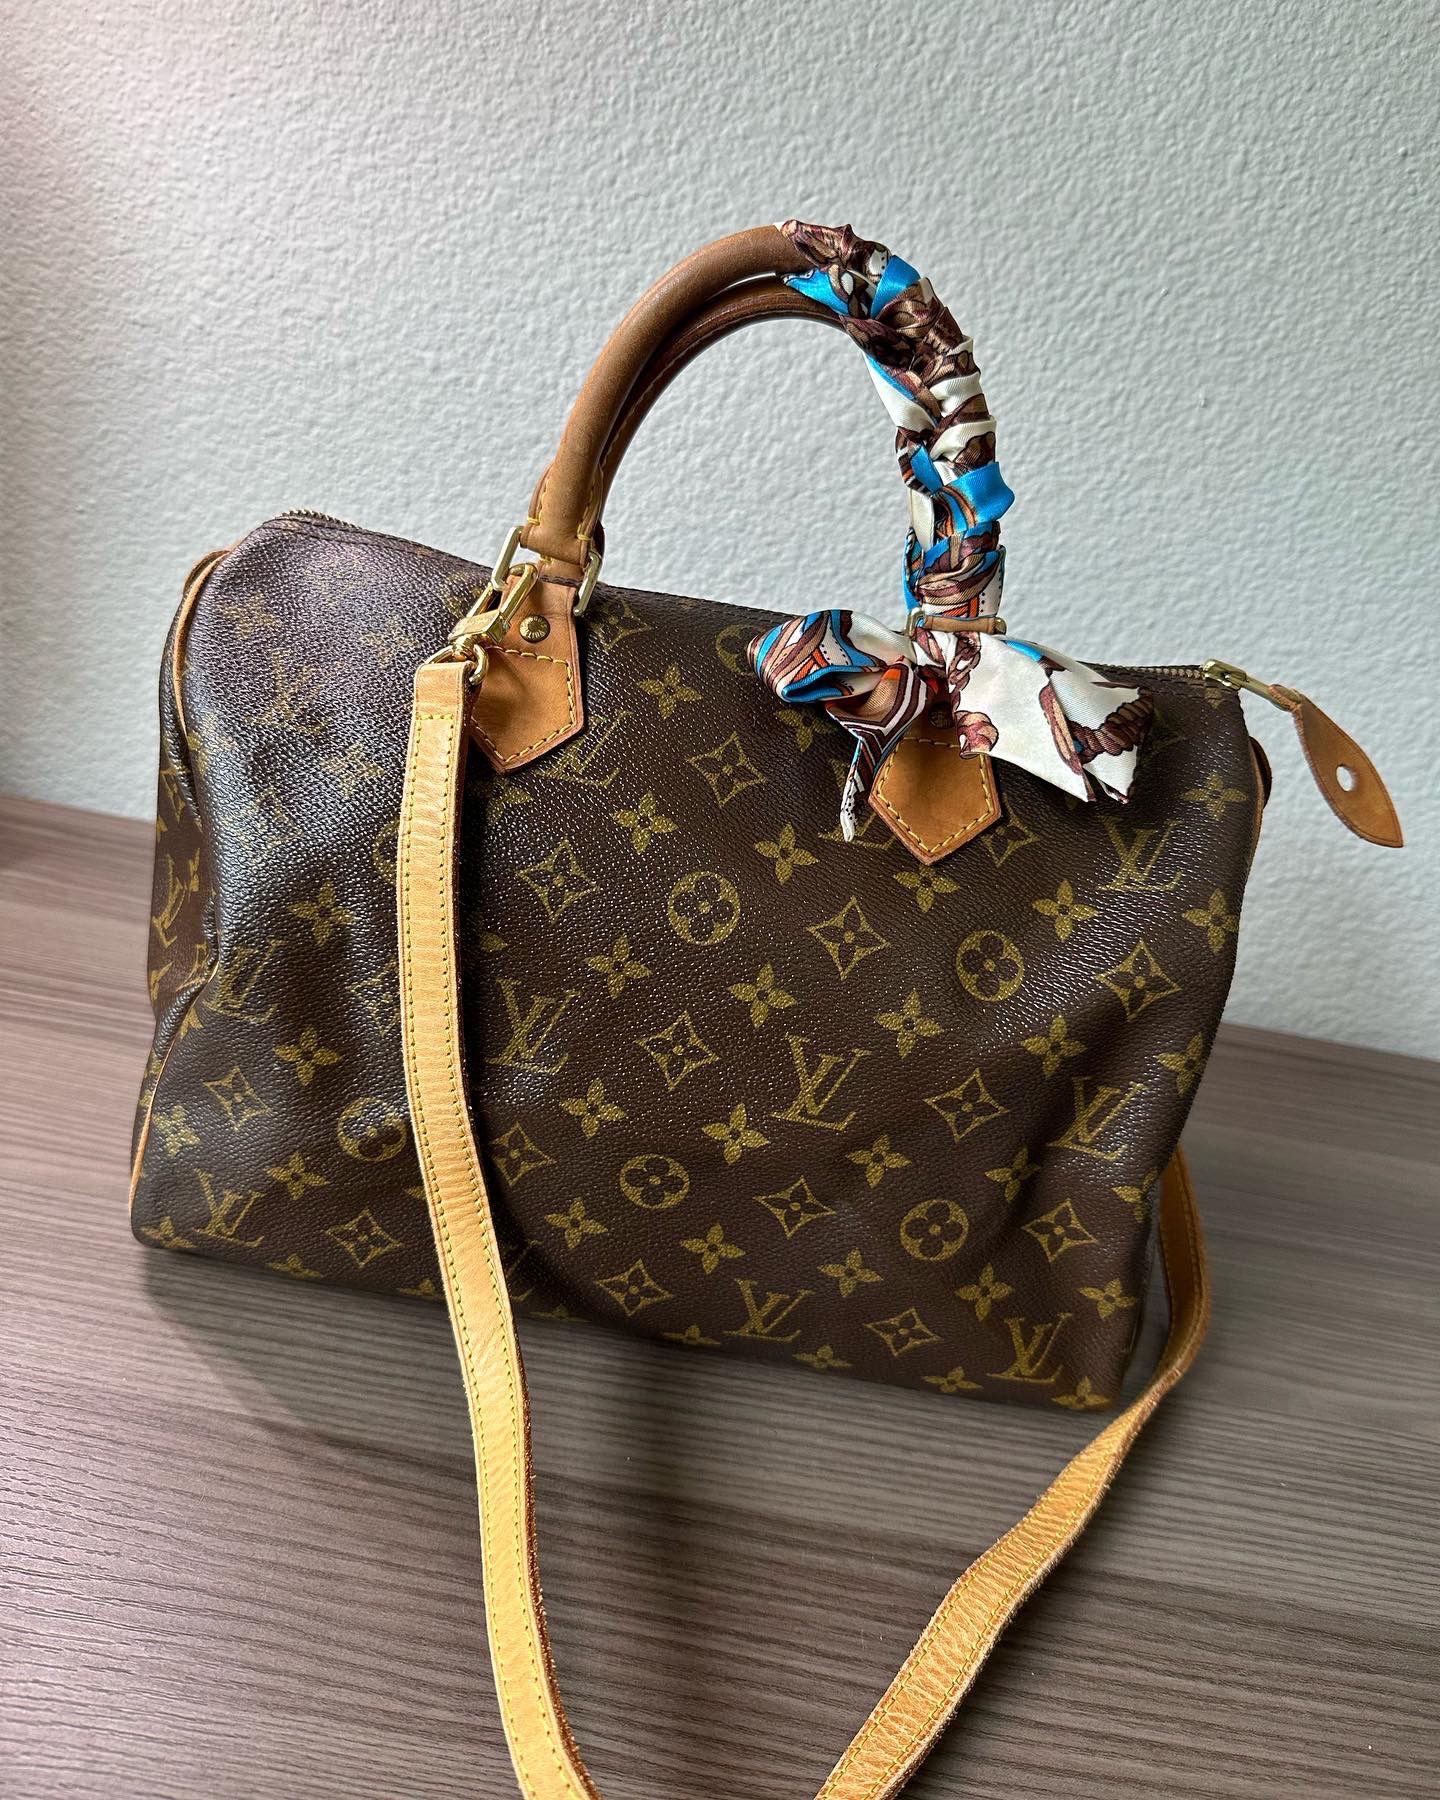 Authentic Louis Vuitton Speedy 30 Pictures and Date Code 